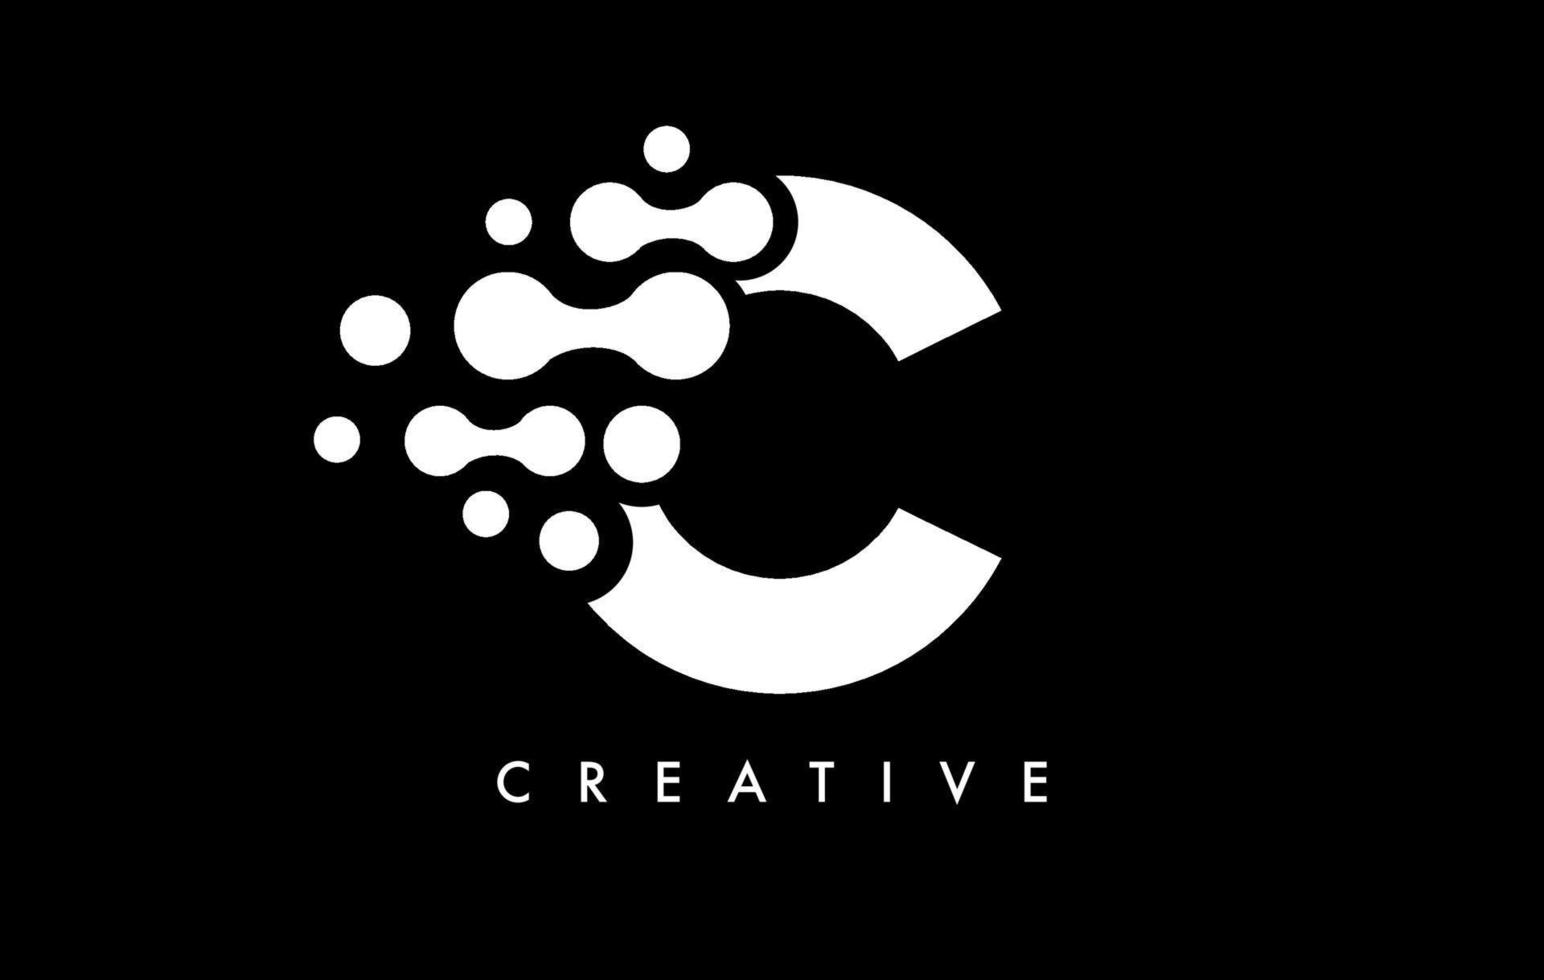 Letter C Dots Logo Design with Black and White Colors on Black Background Vector